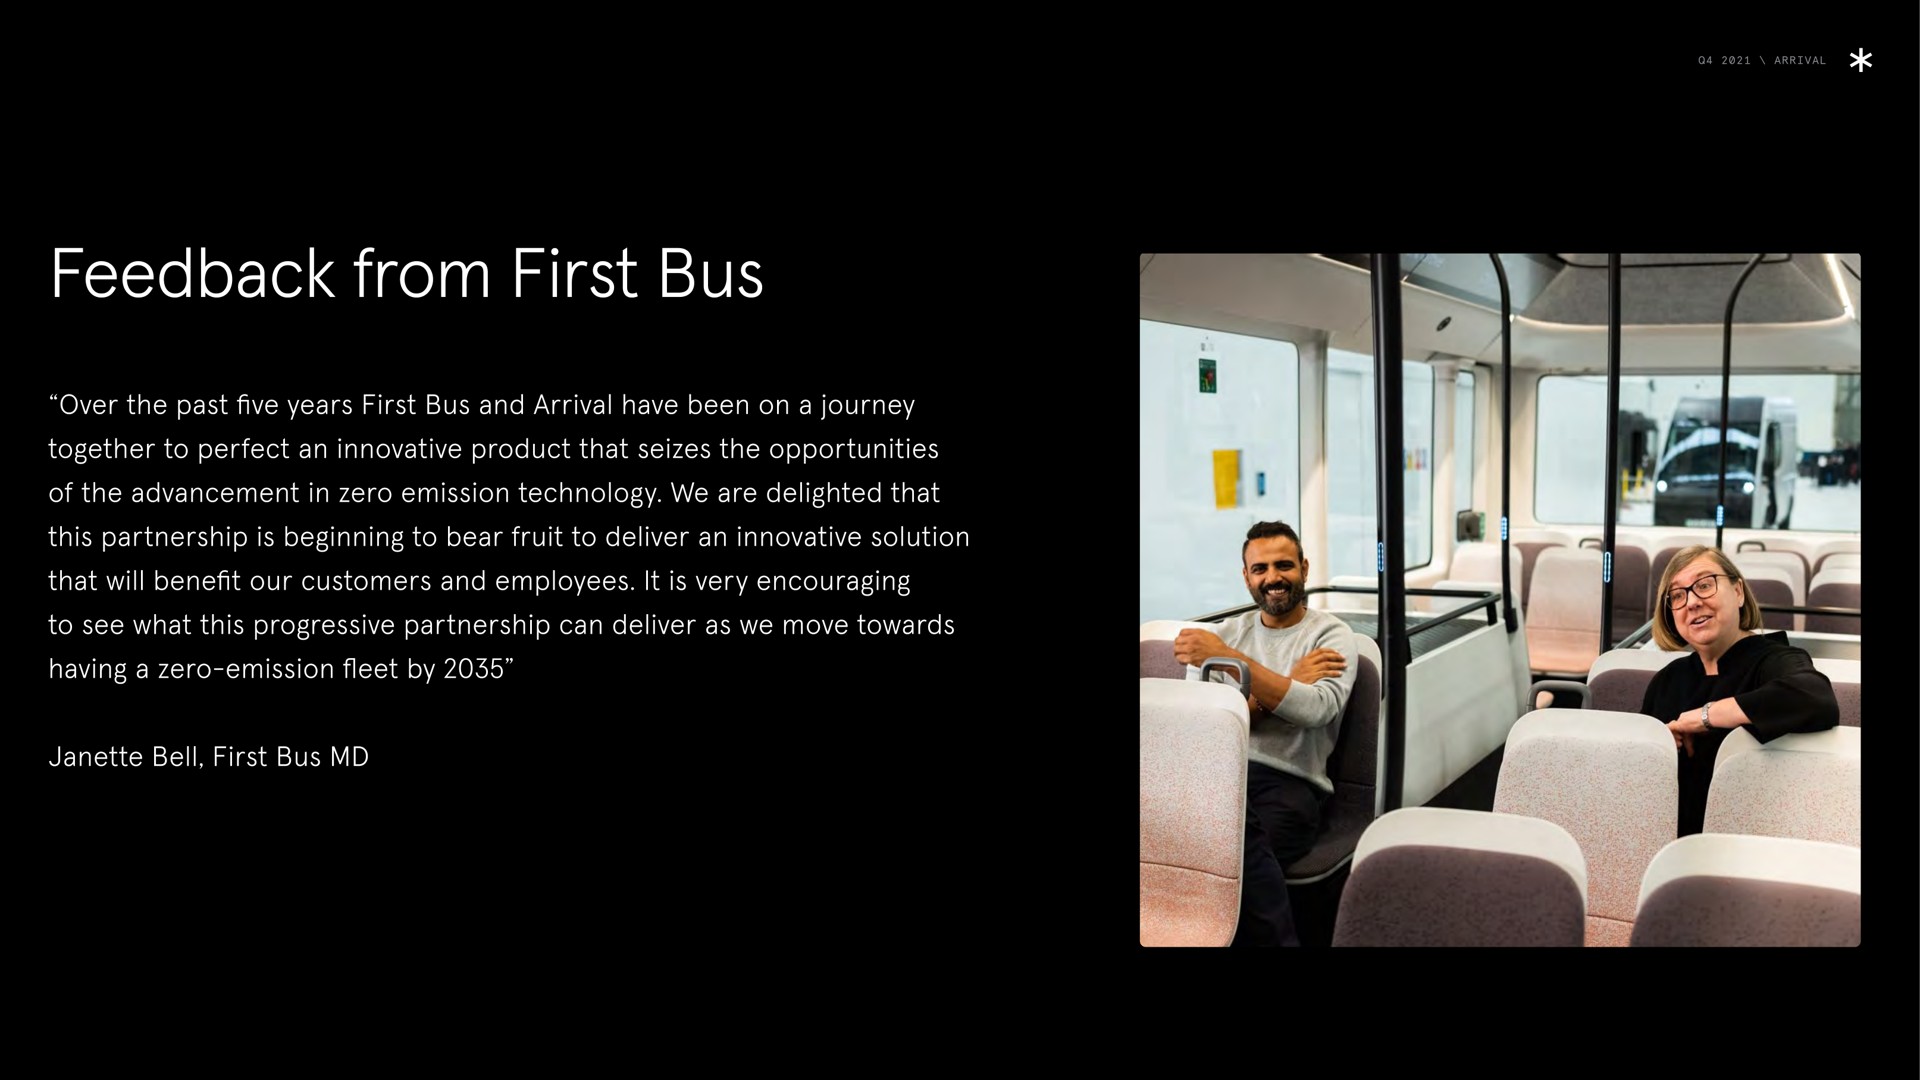 arrival feedback from first bus over the past five years first bus and arrival have been on a journey together to perfect an innovative product that seizes the opportunities of the advancement in zero emission technology we are delighted that this partnership is beginning to bear fruit to deliver an innovative solution that will benefit our customers and employees it is very encouraging to see what this progressive partnership can deliver as we move towards having a zero emission fleet by bell first bus hie | Arrival